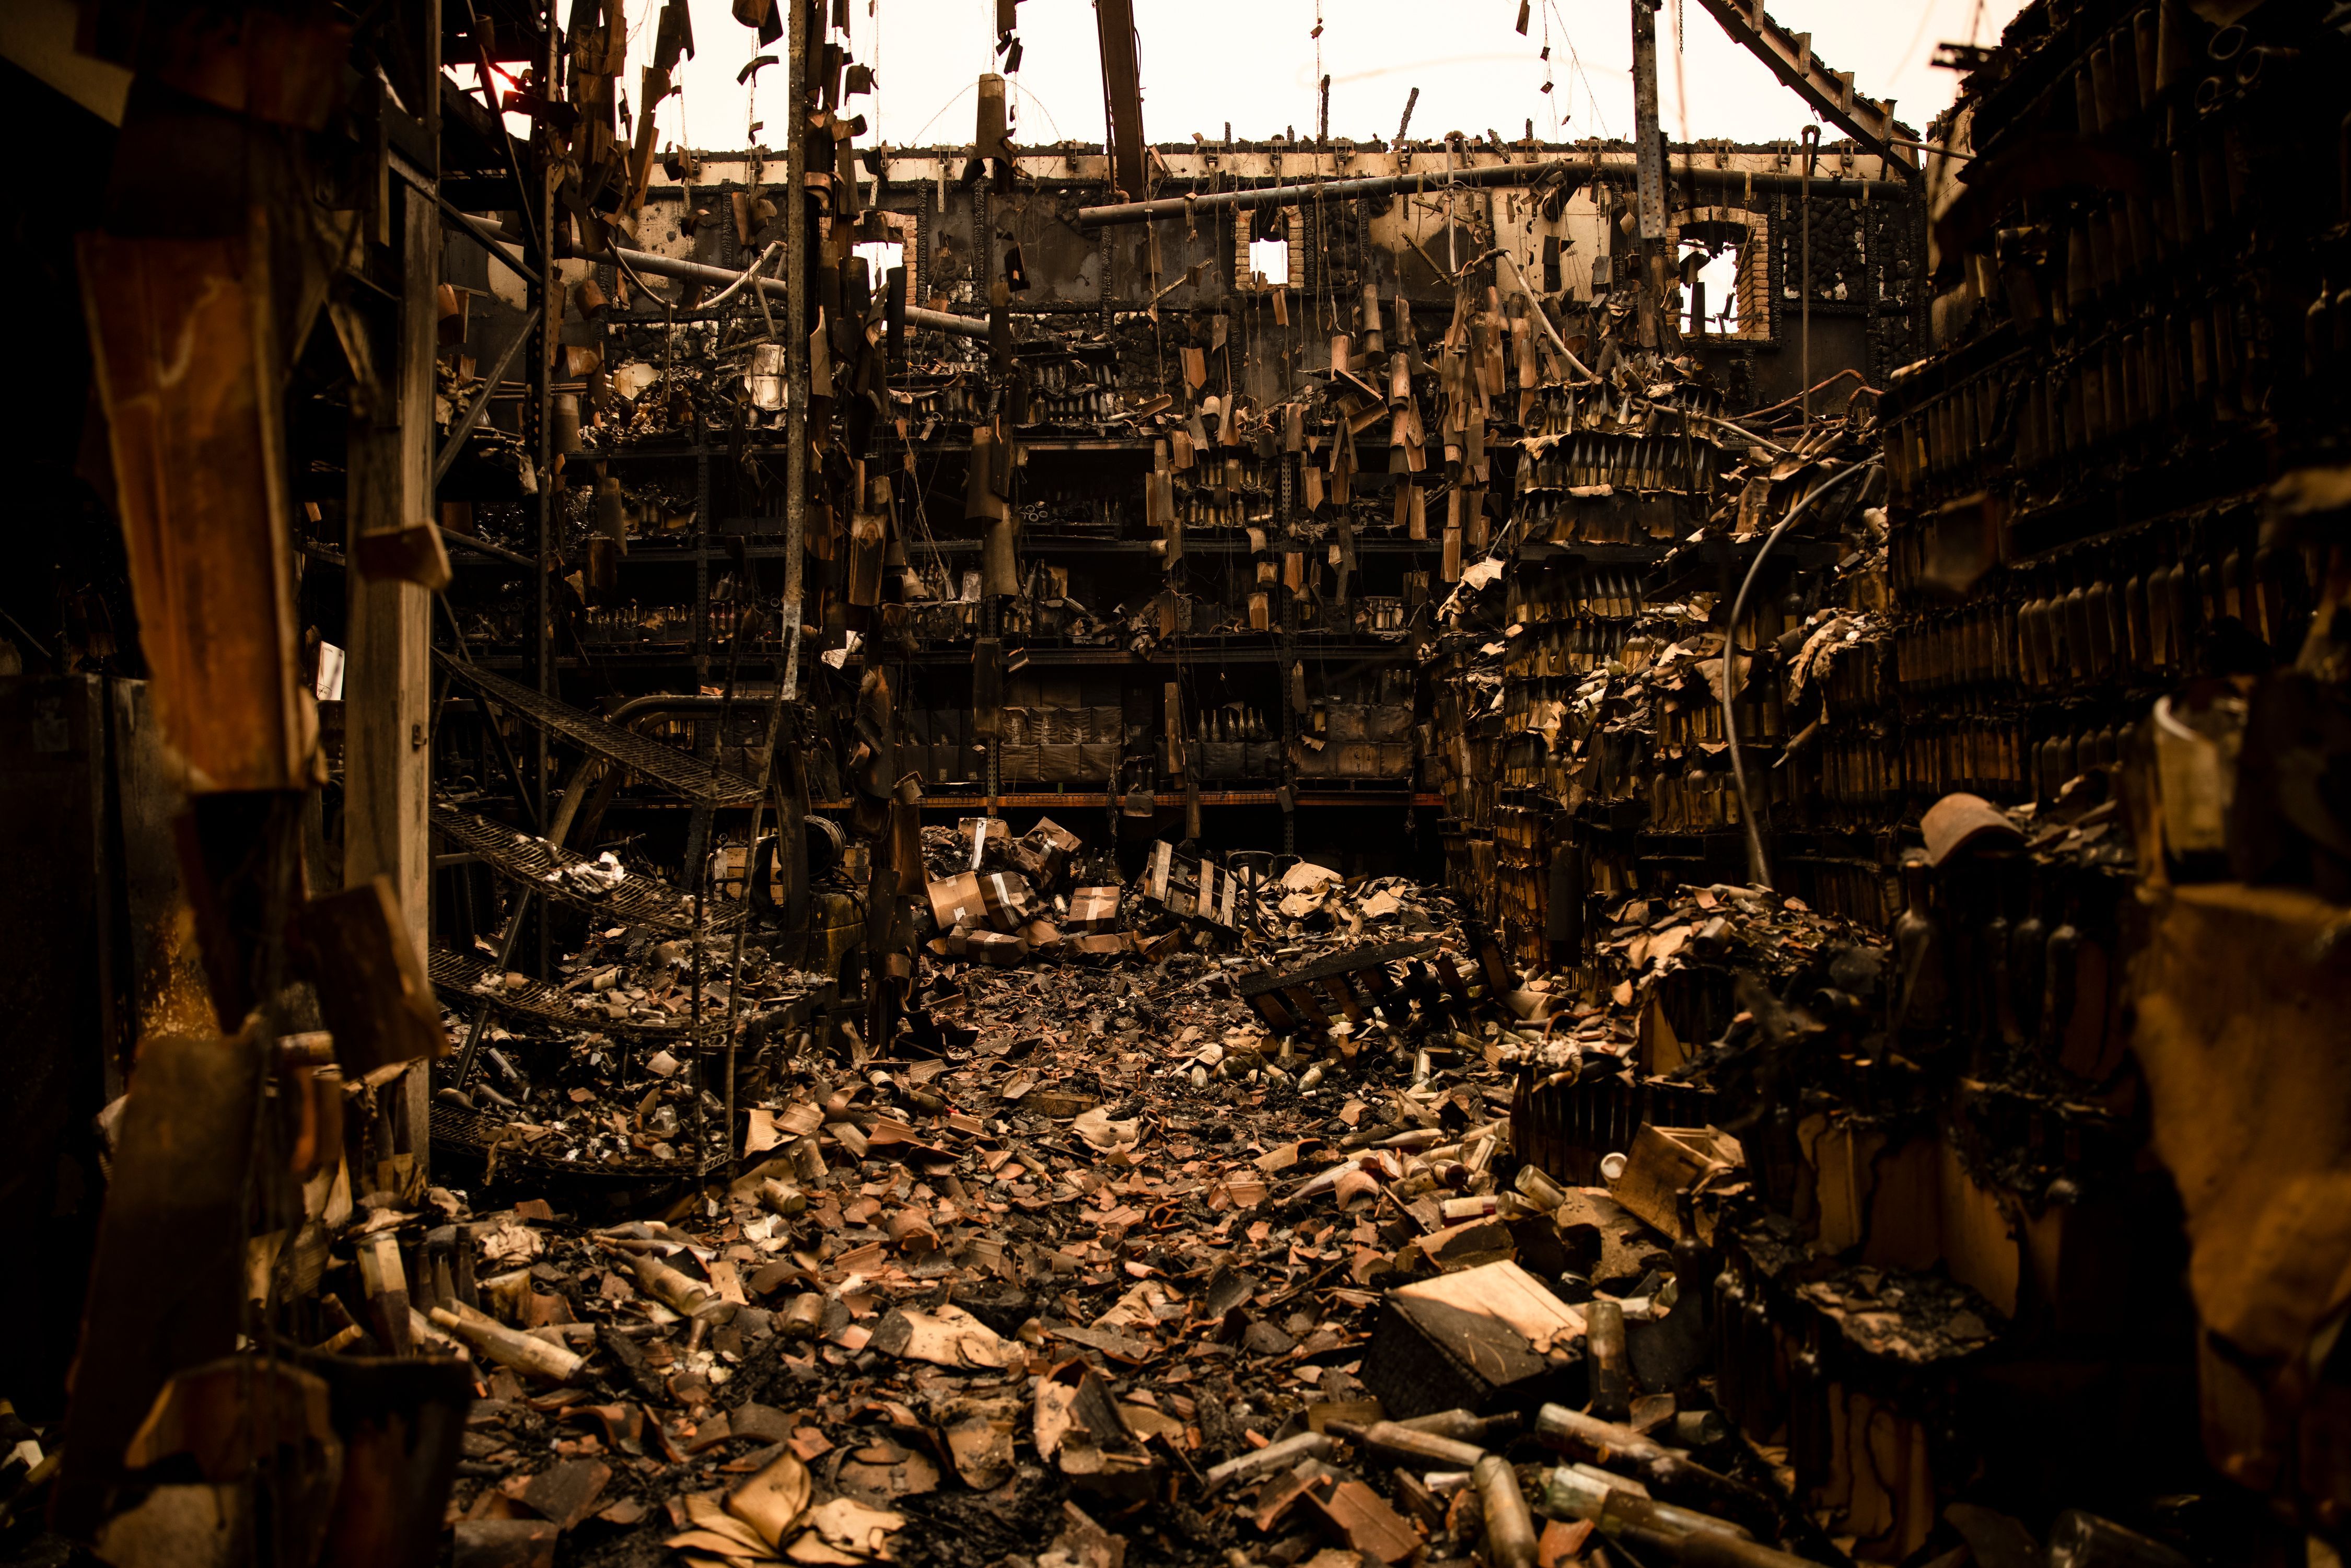  Charred bottles are seen in the remains of the a warehouse in the Farm House at the Castello di Amorosa winery which was gutted by the Glass Fire in Napa Valley, California on September 29